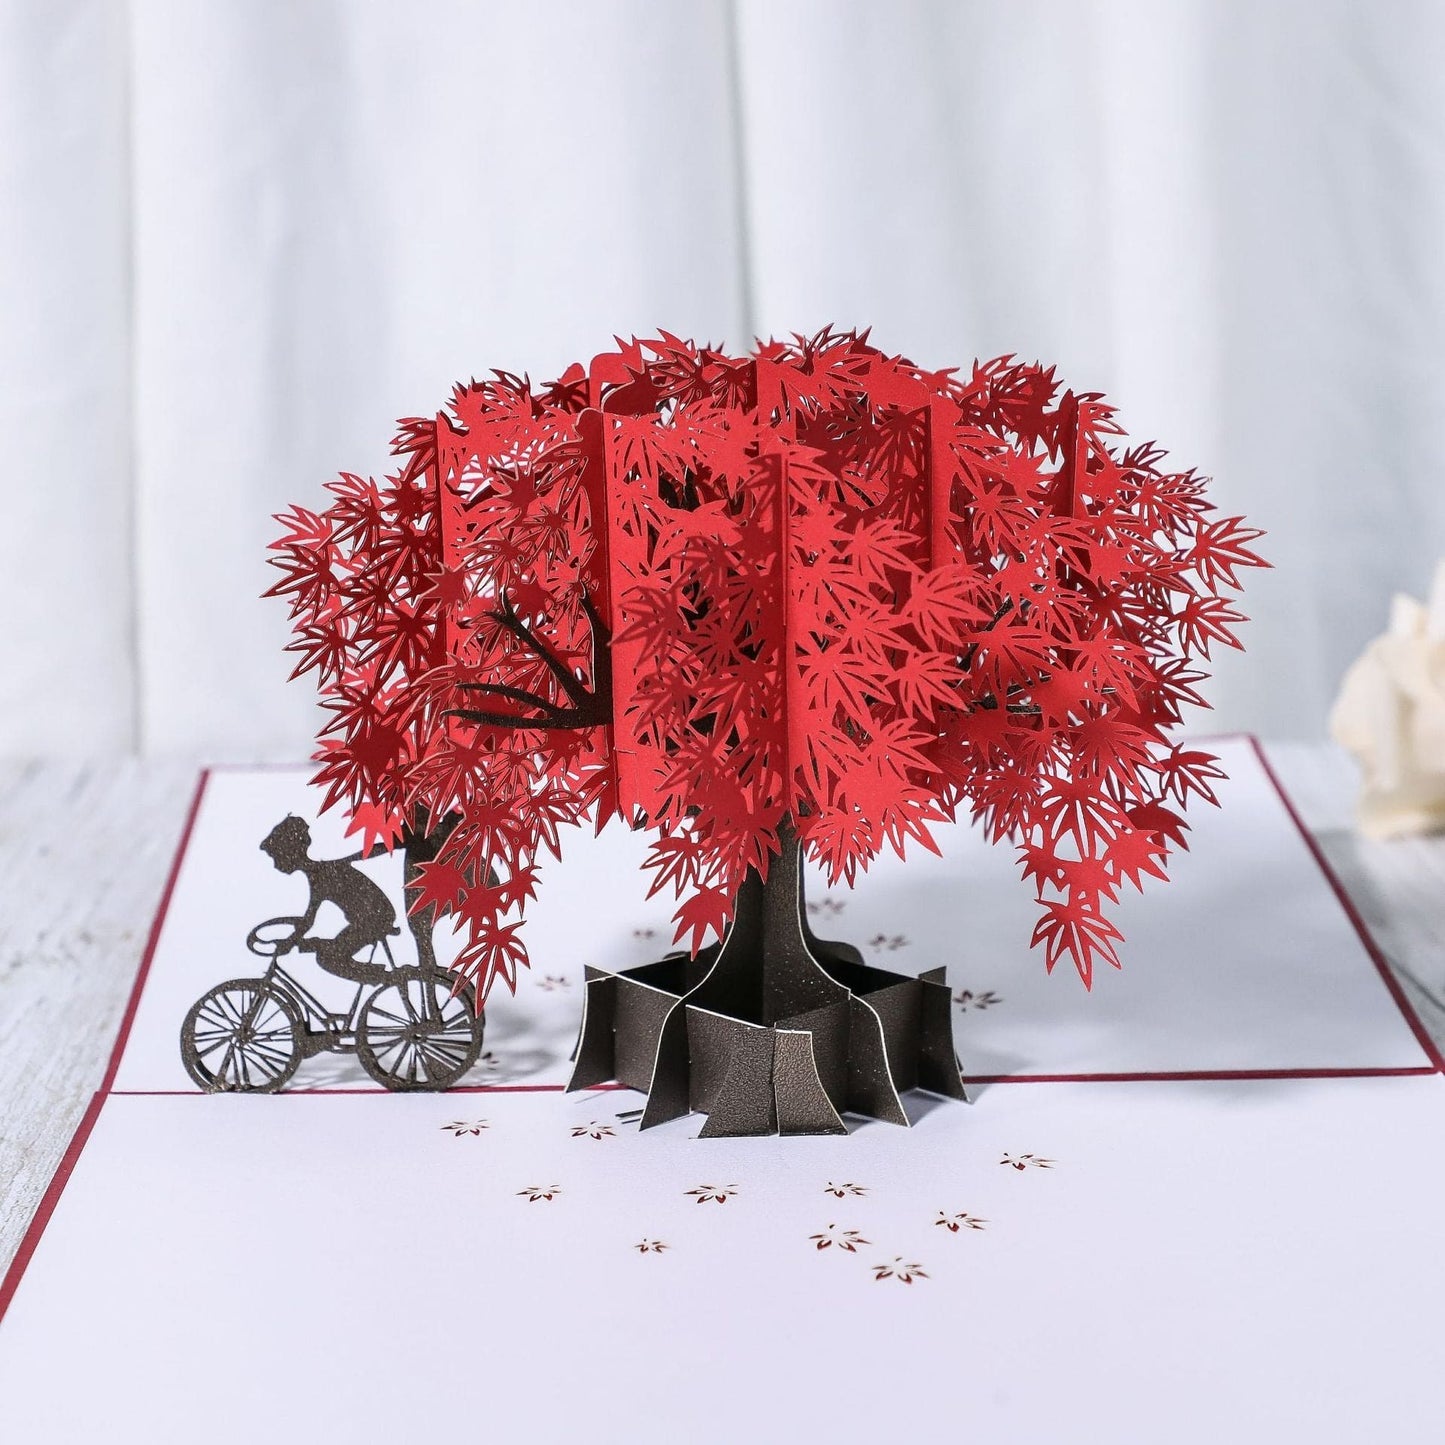 3D Engagement Cards Lovers Wedding Invitation Greeting Cards Laser Cut Valentine's Day Gift Anniversary Card Wholesale